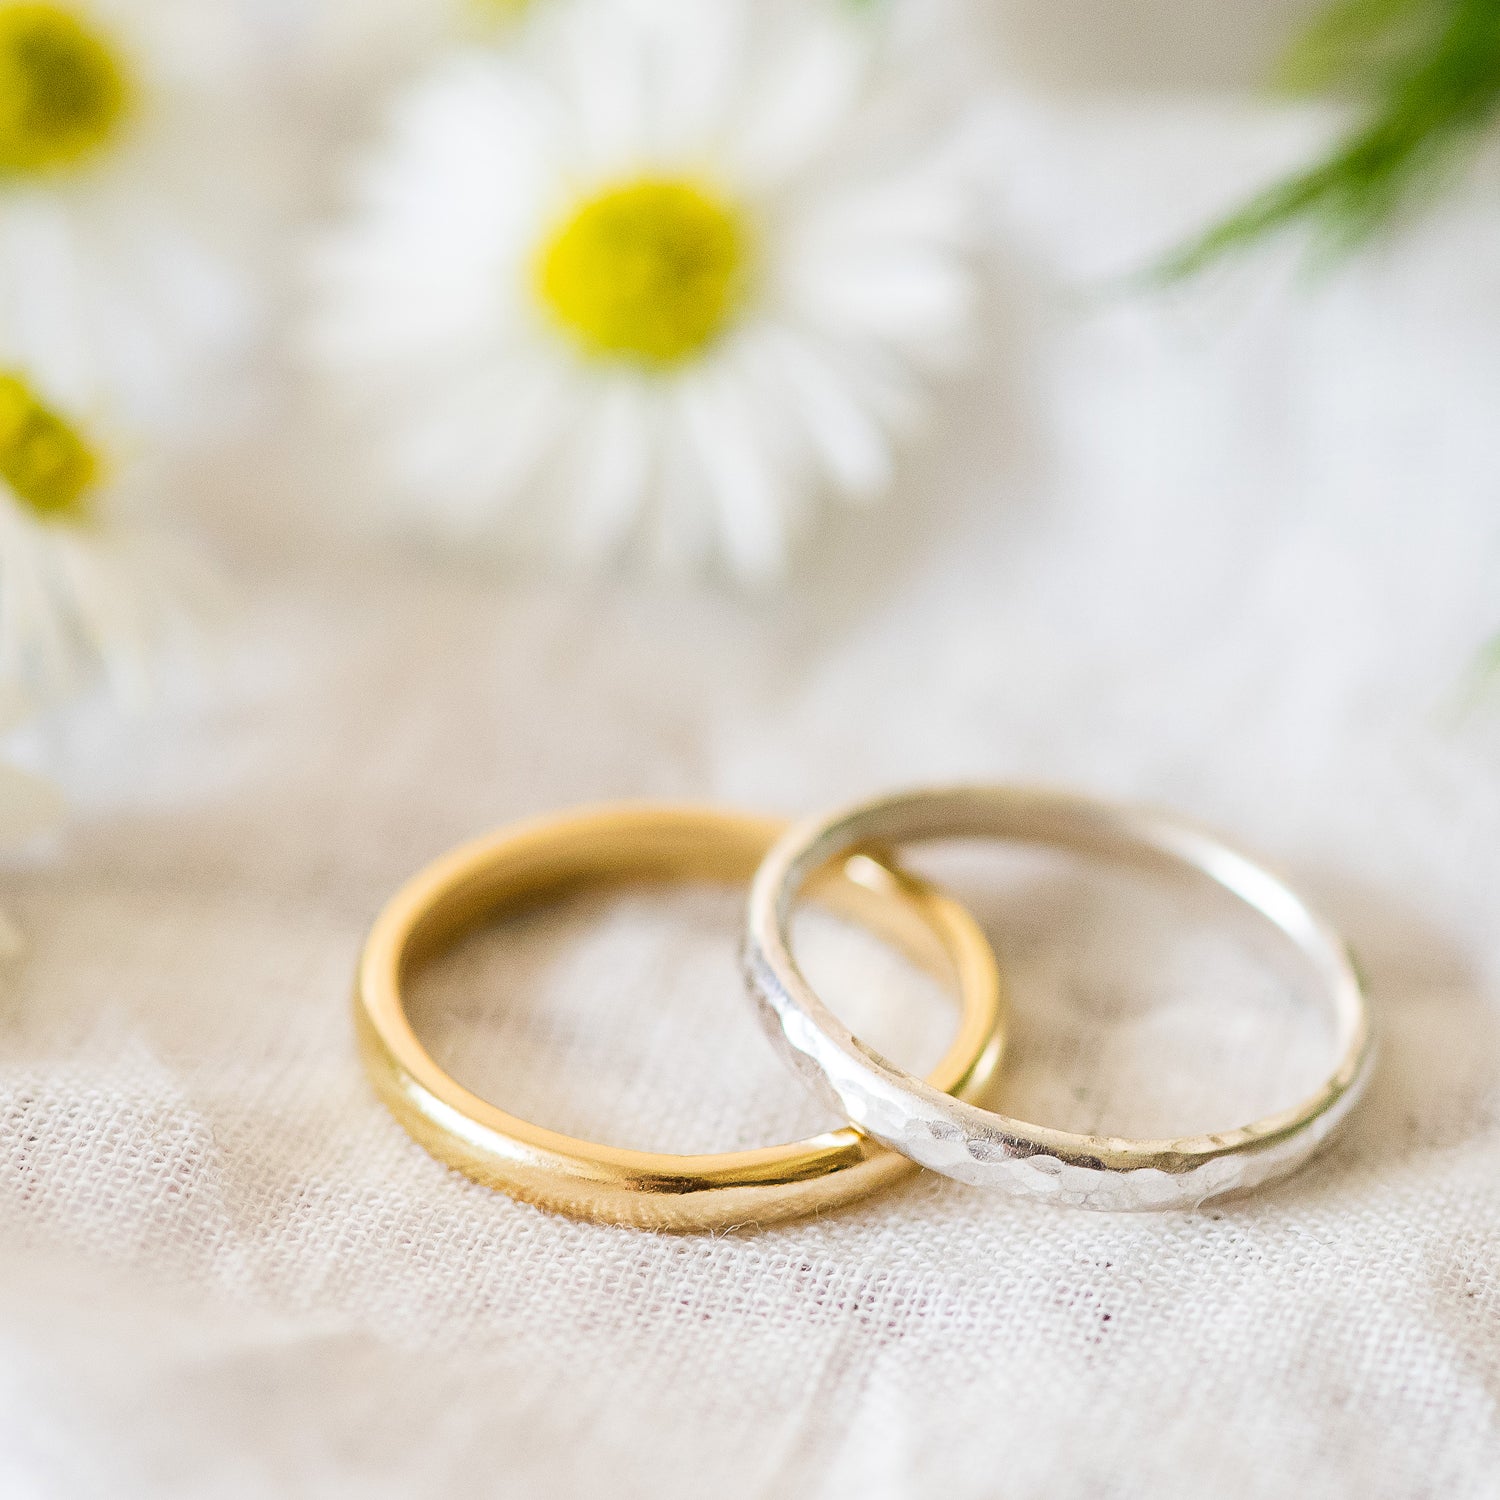 18ct yellow gold D shaped wedding band, also pictured with a hammered sterling silver band